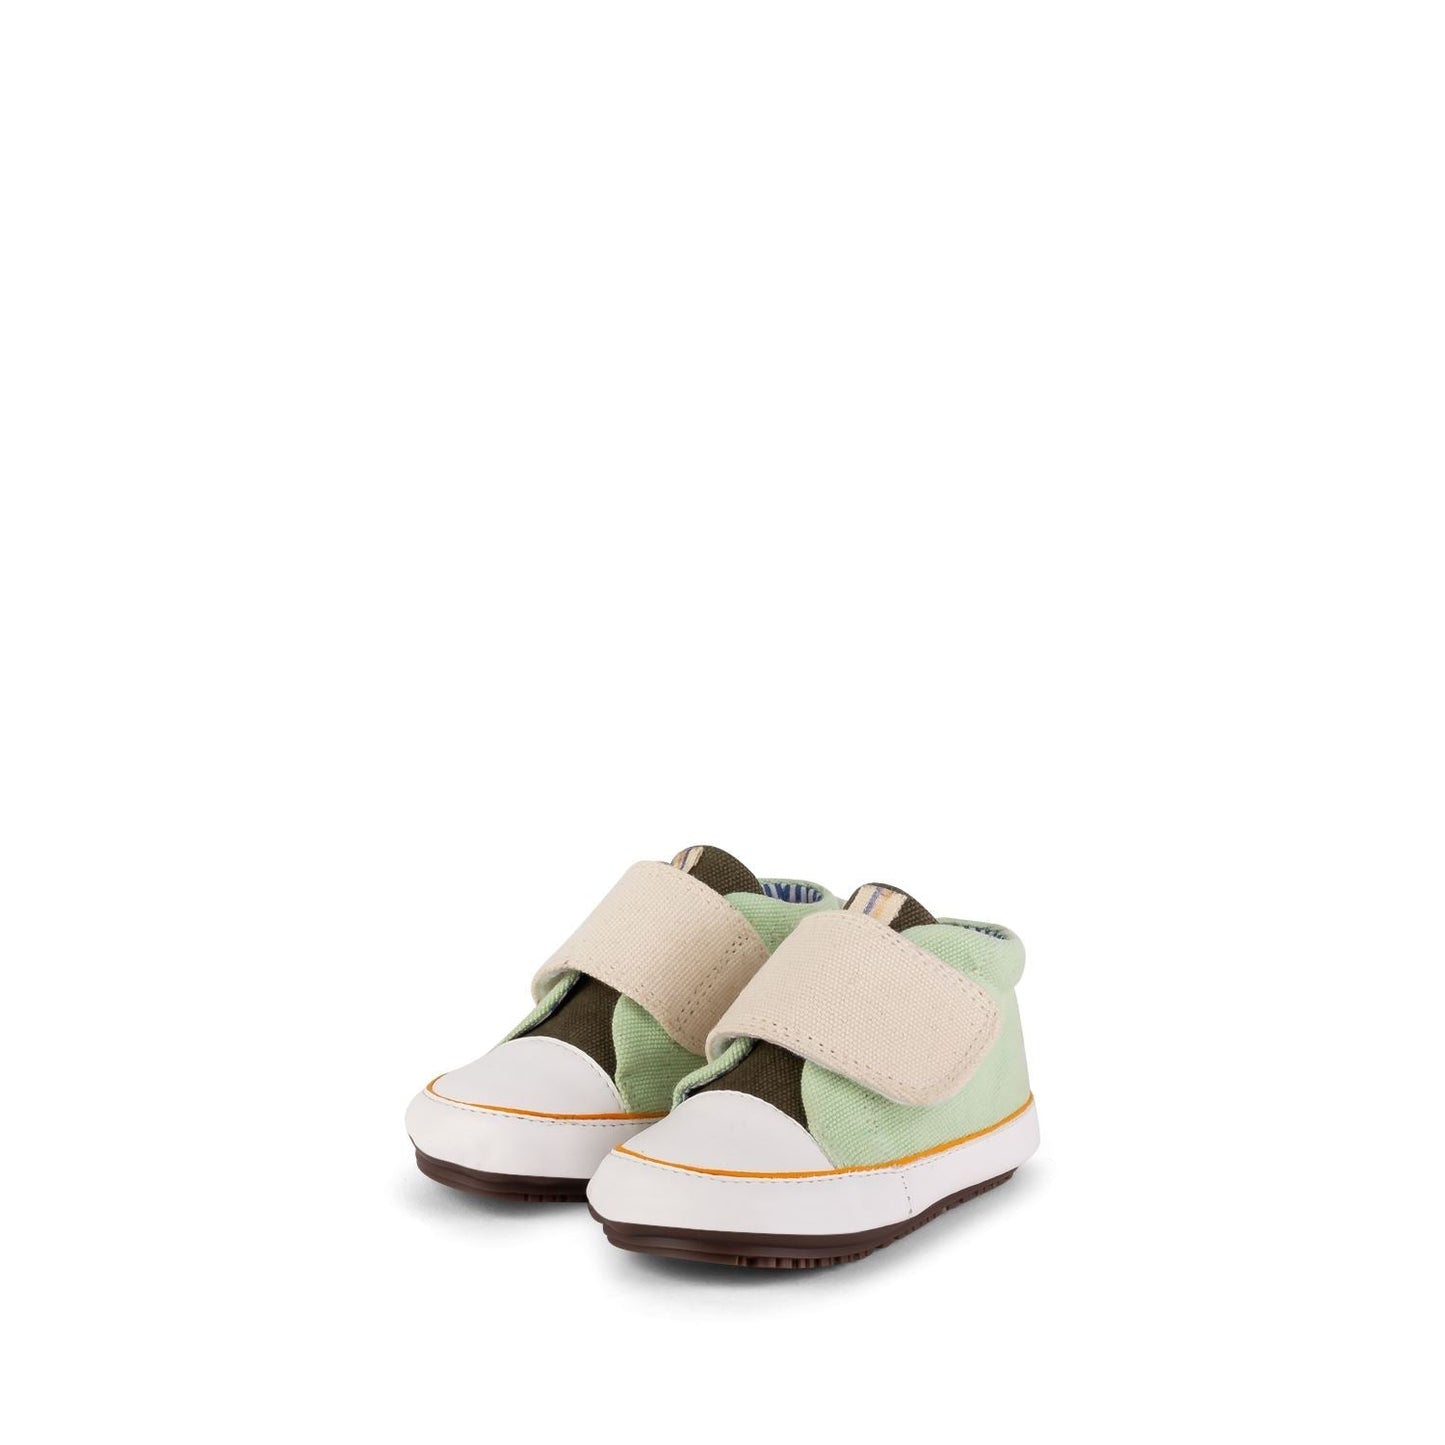 Anis/Khaki Eco Strap Sneaker Booties Shoes & Booties Dulis Shoes 